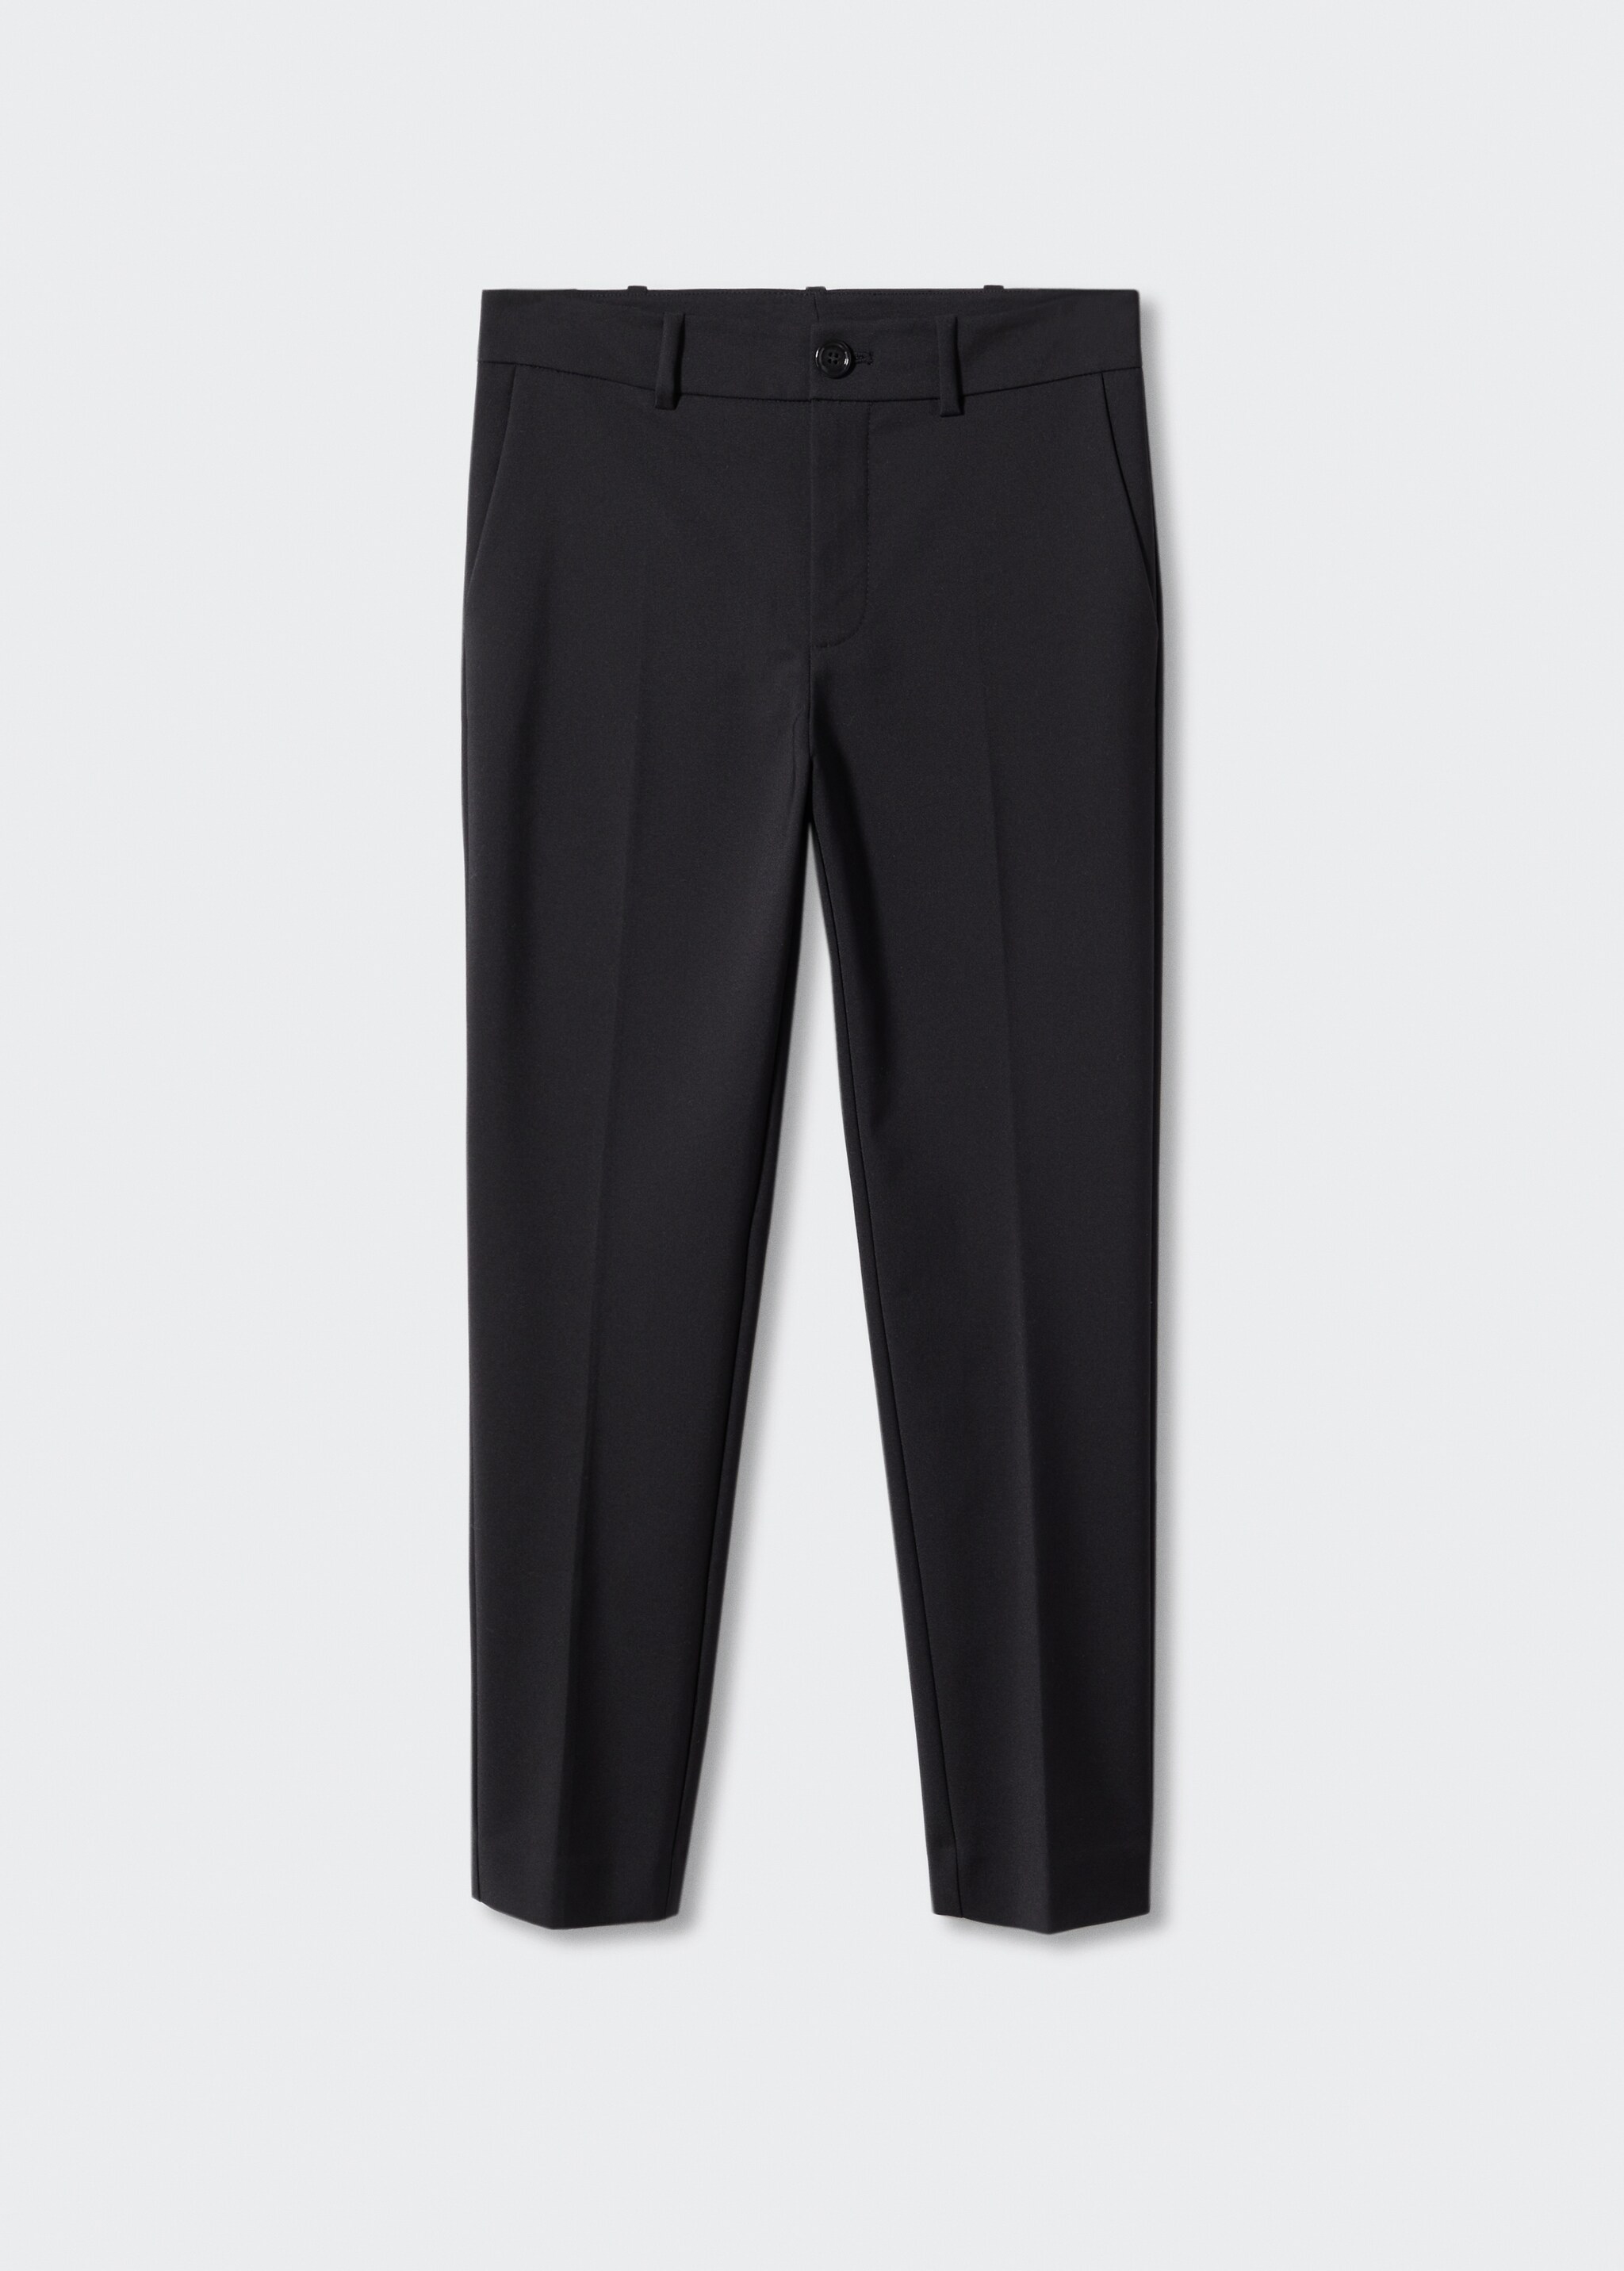 Skinny suit pants - Article without model